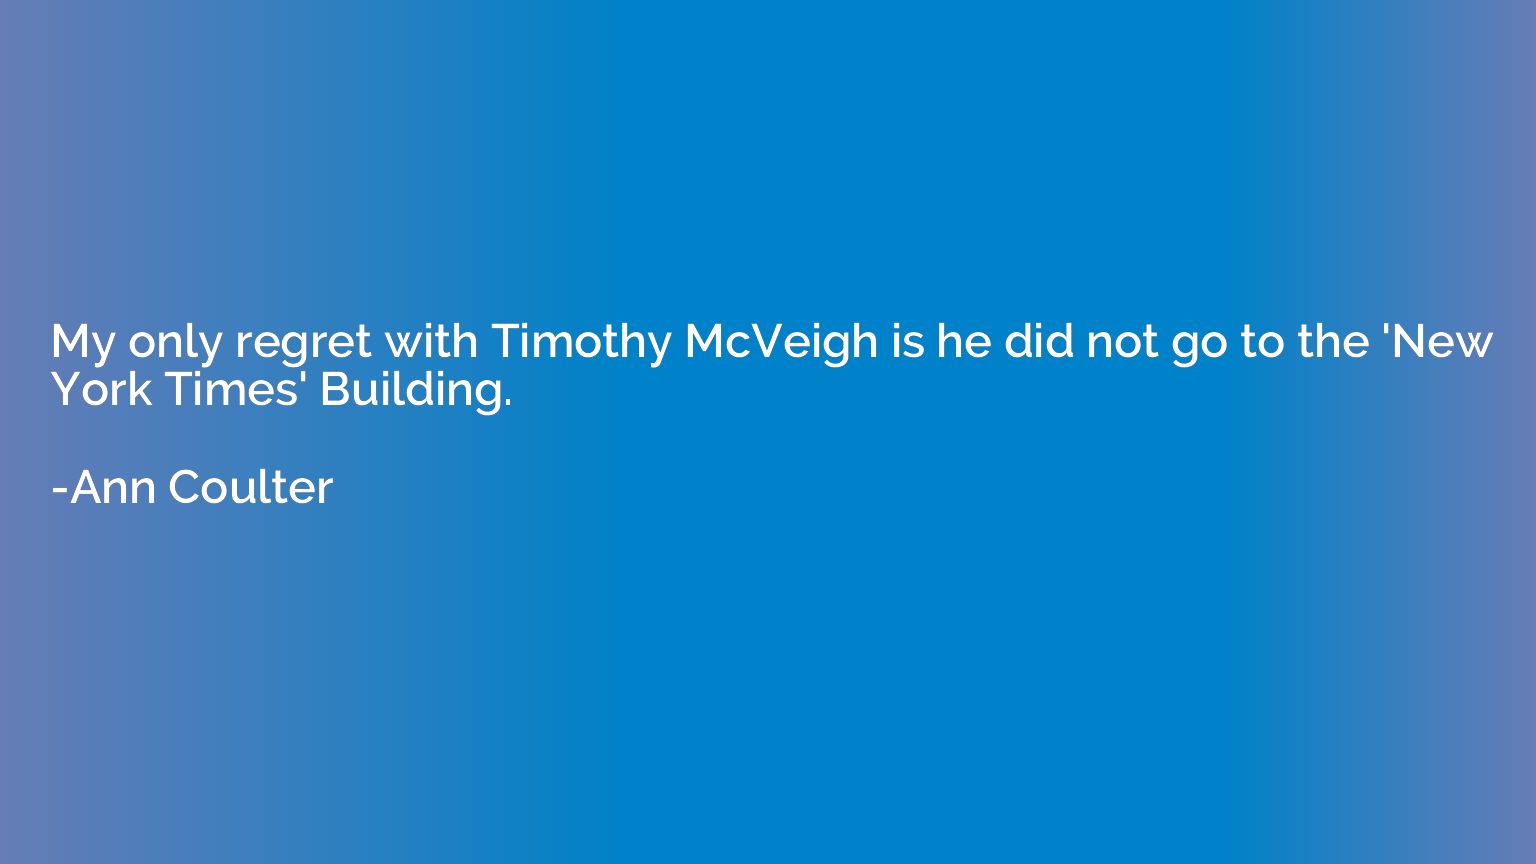 My only regret with Timothy McVeigh is he did not go to the 